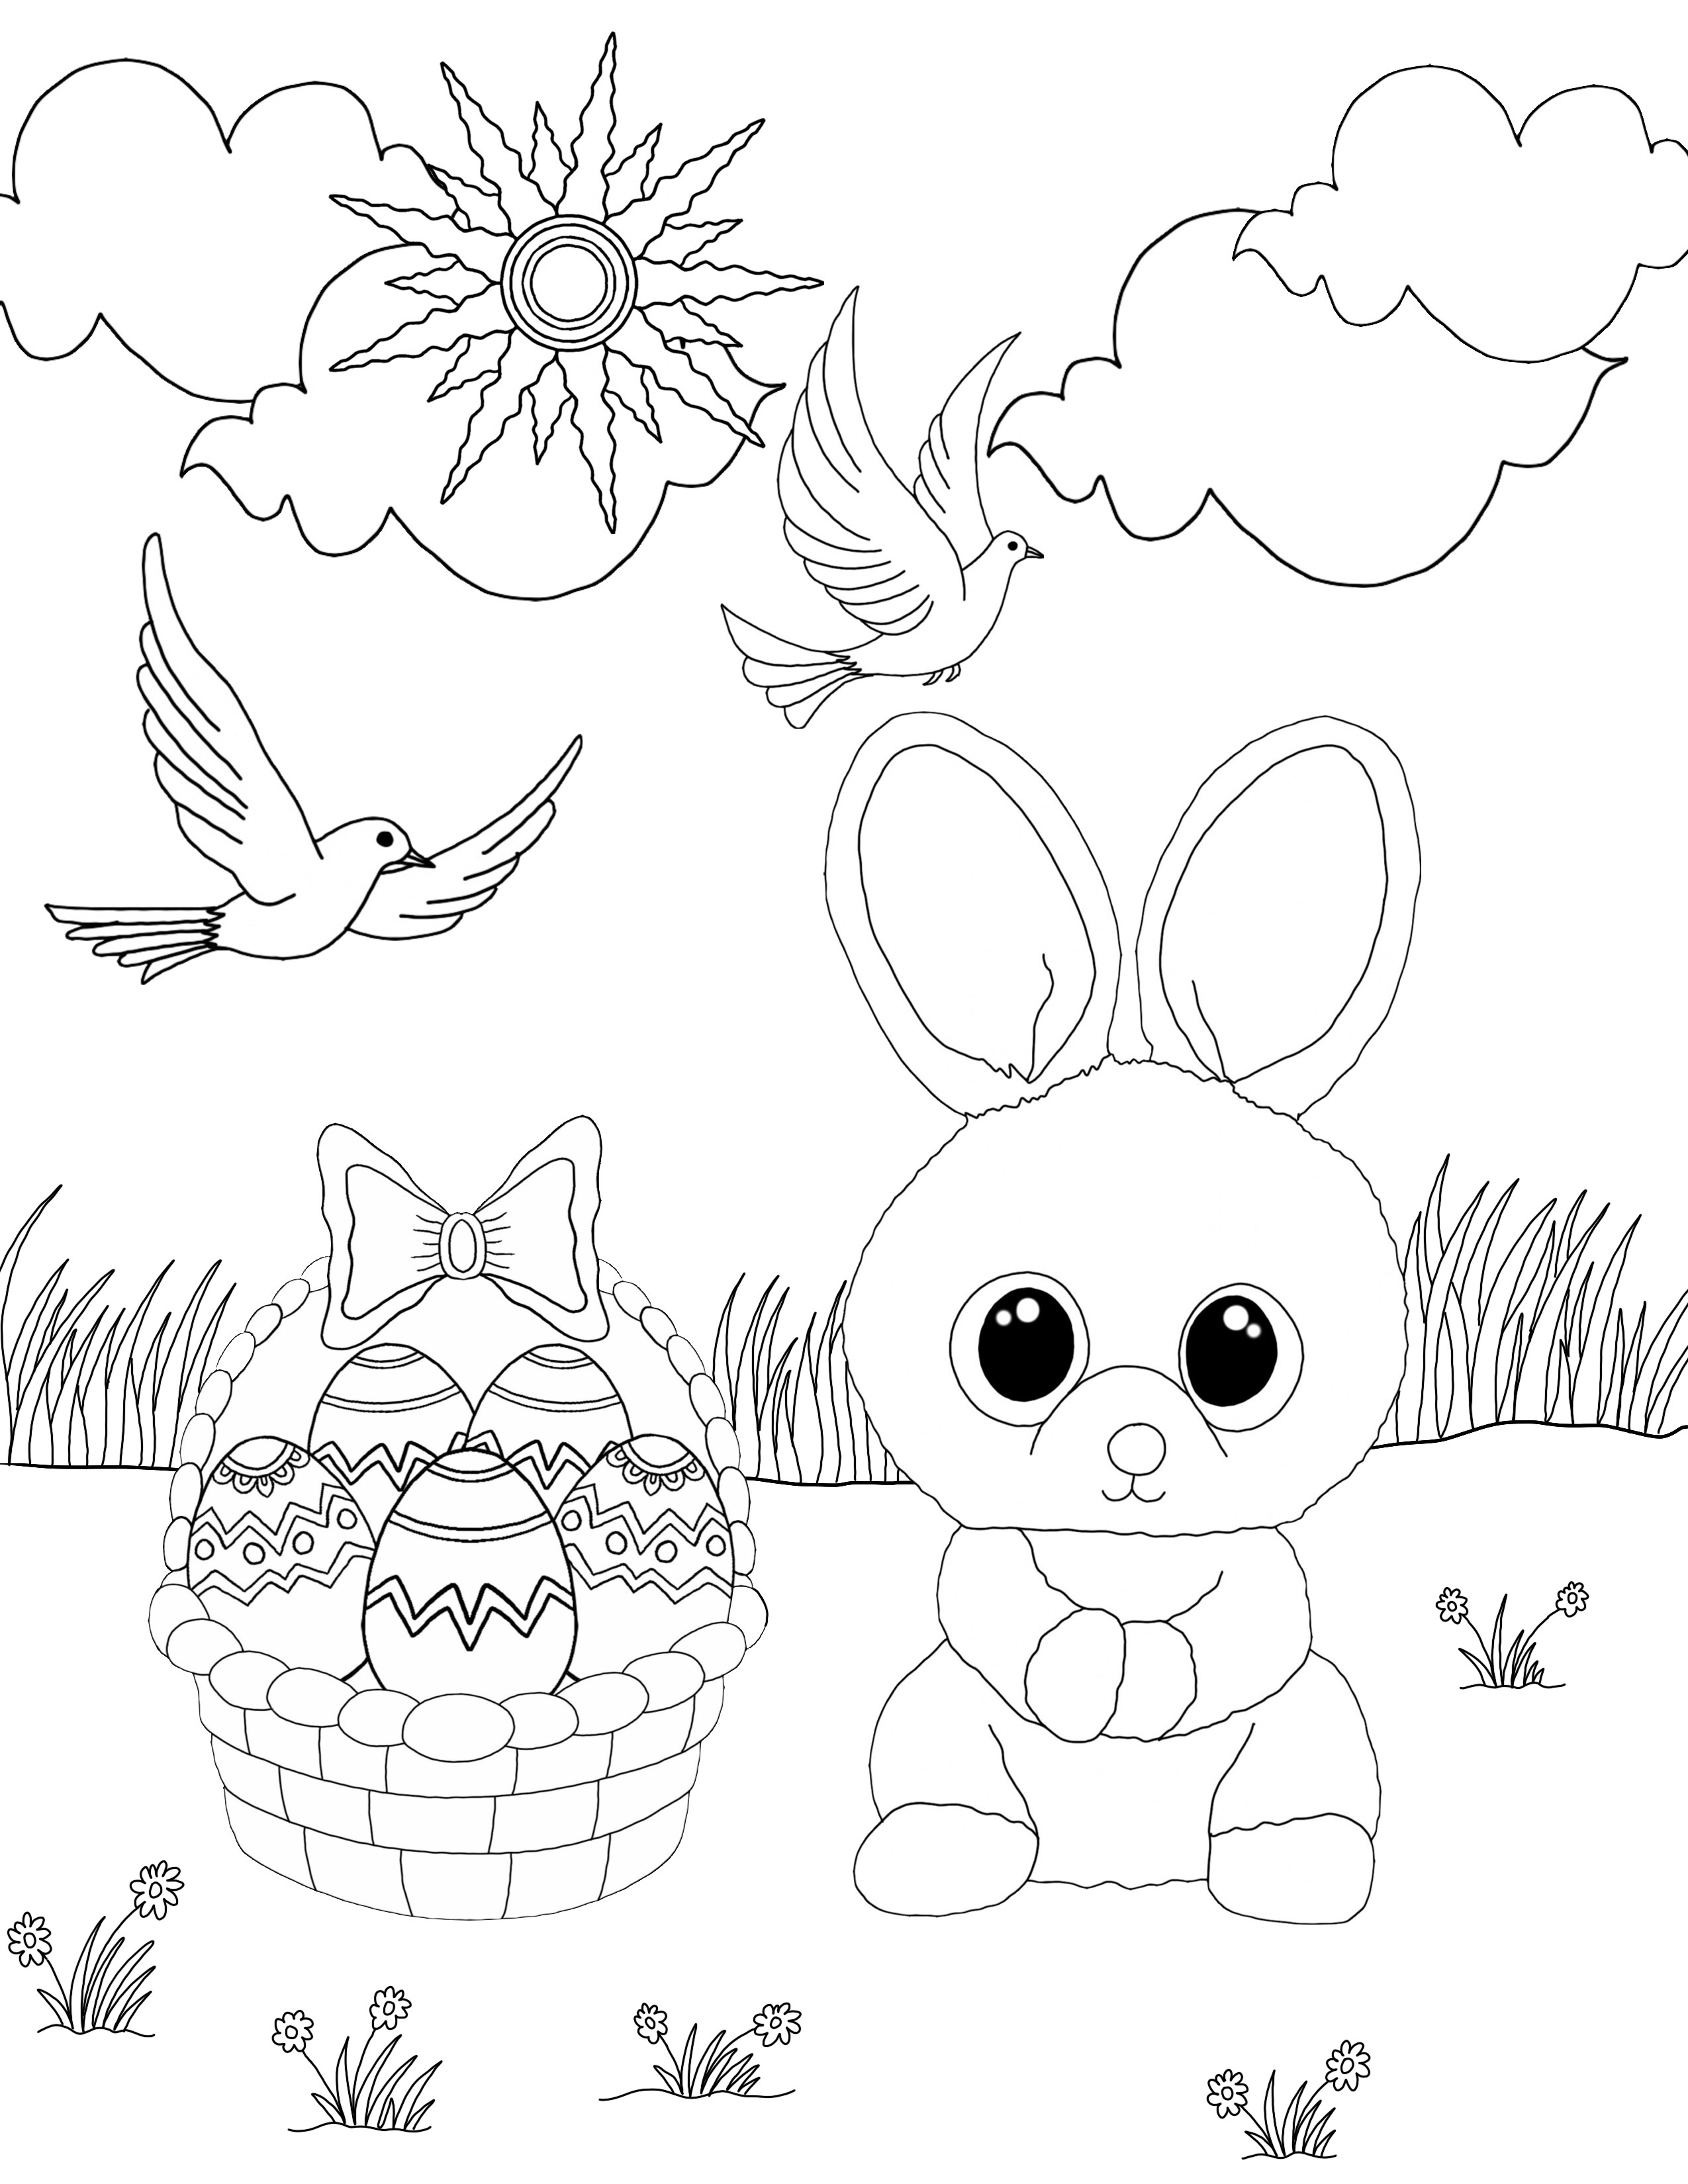 Free Beanie Boo Coloring Pages Download &amp; Print: Cats, Dogs And Unicorns - Free Printable Beanie Boo Coloring Pages